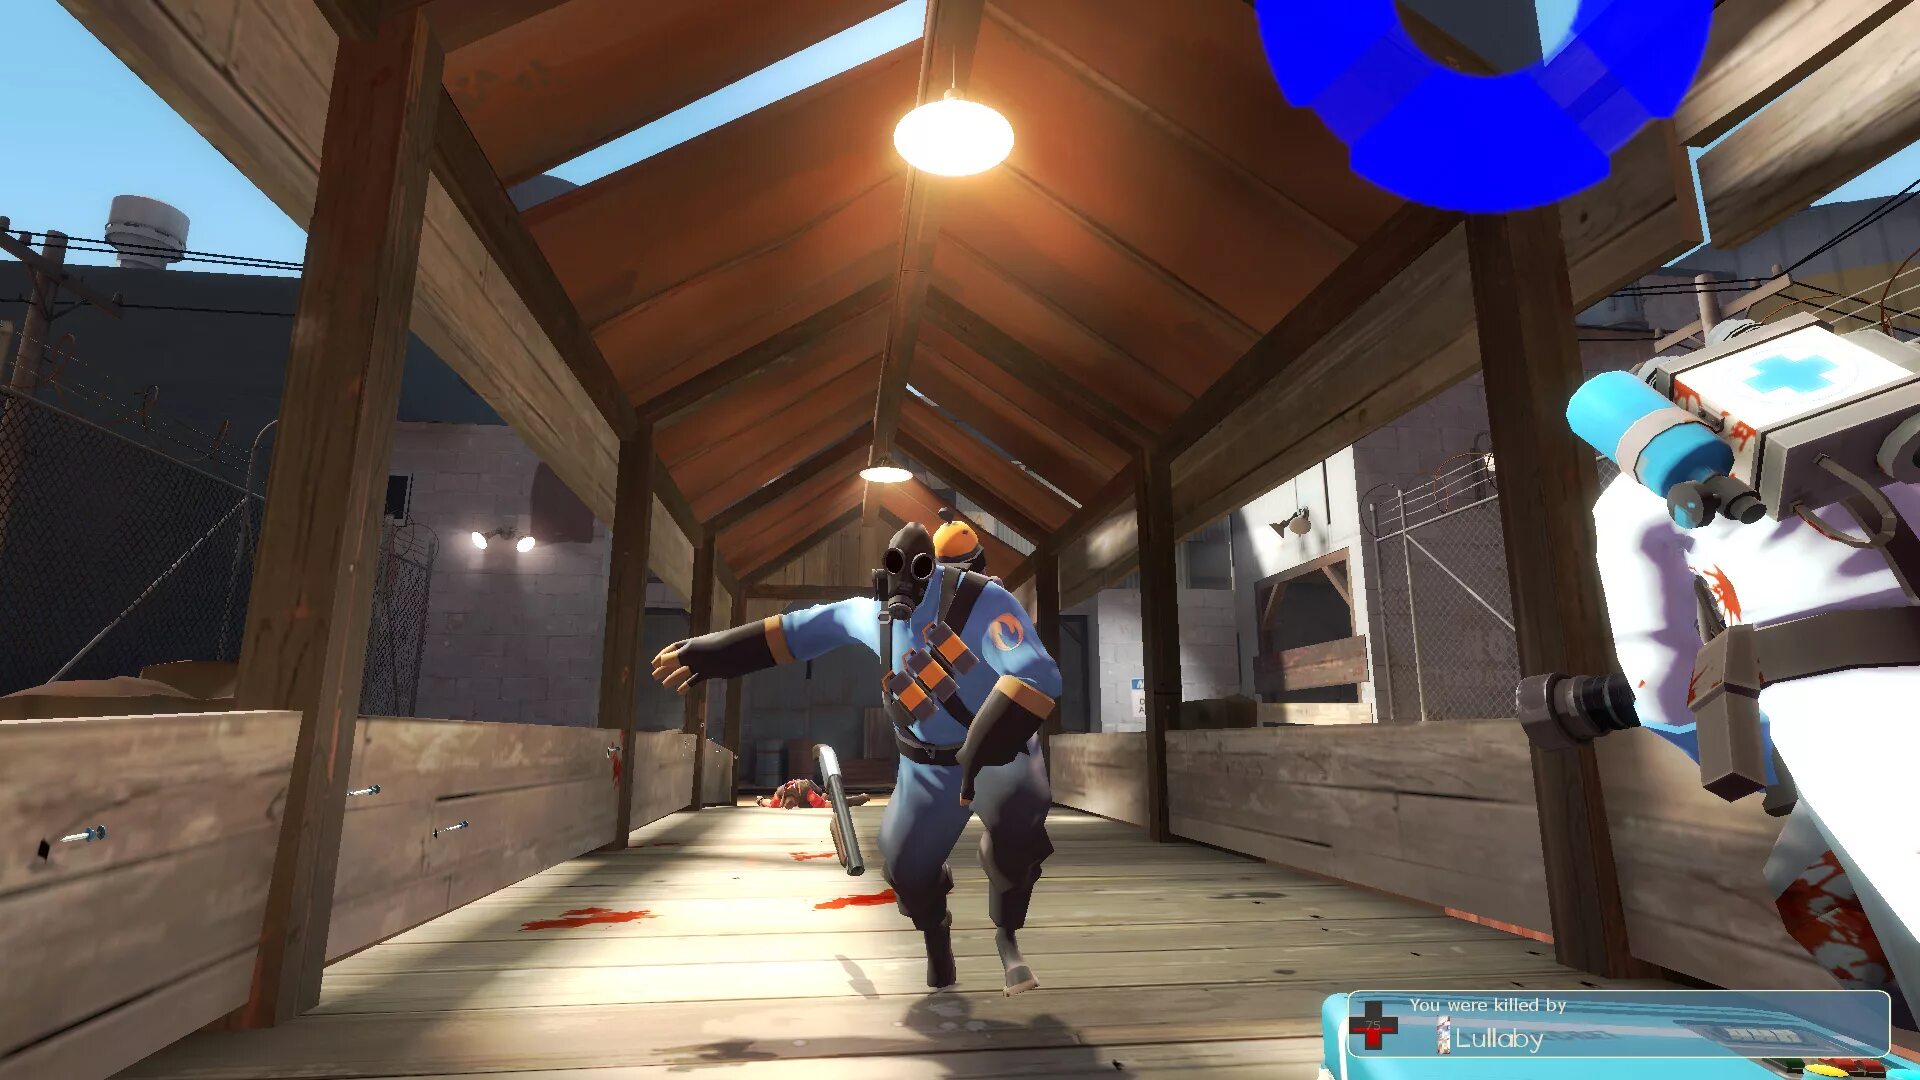 Зе ласт гейм 2. Team Fortress 2 2fort. Team Fortress 2 Скриншоты ['DB. Team Fortress 2 Vintage Mod. Обои Team Fortress 2 2fort.